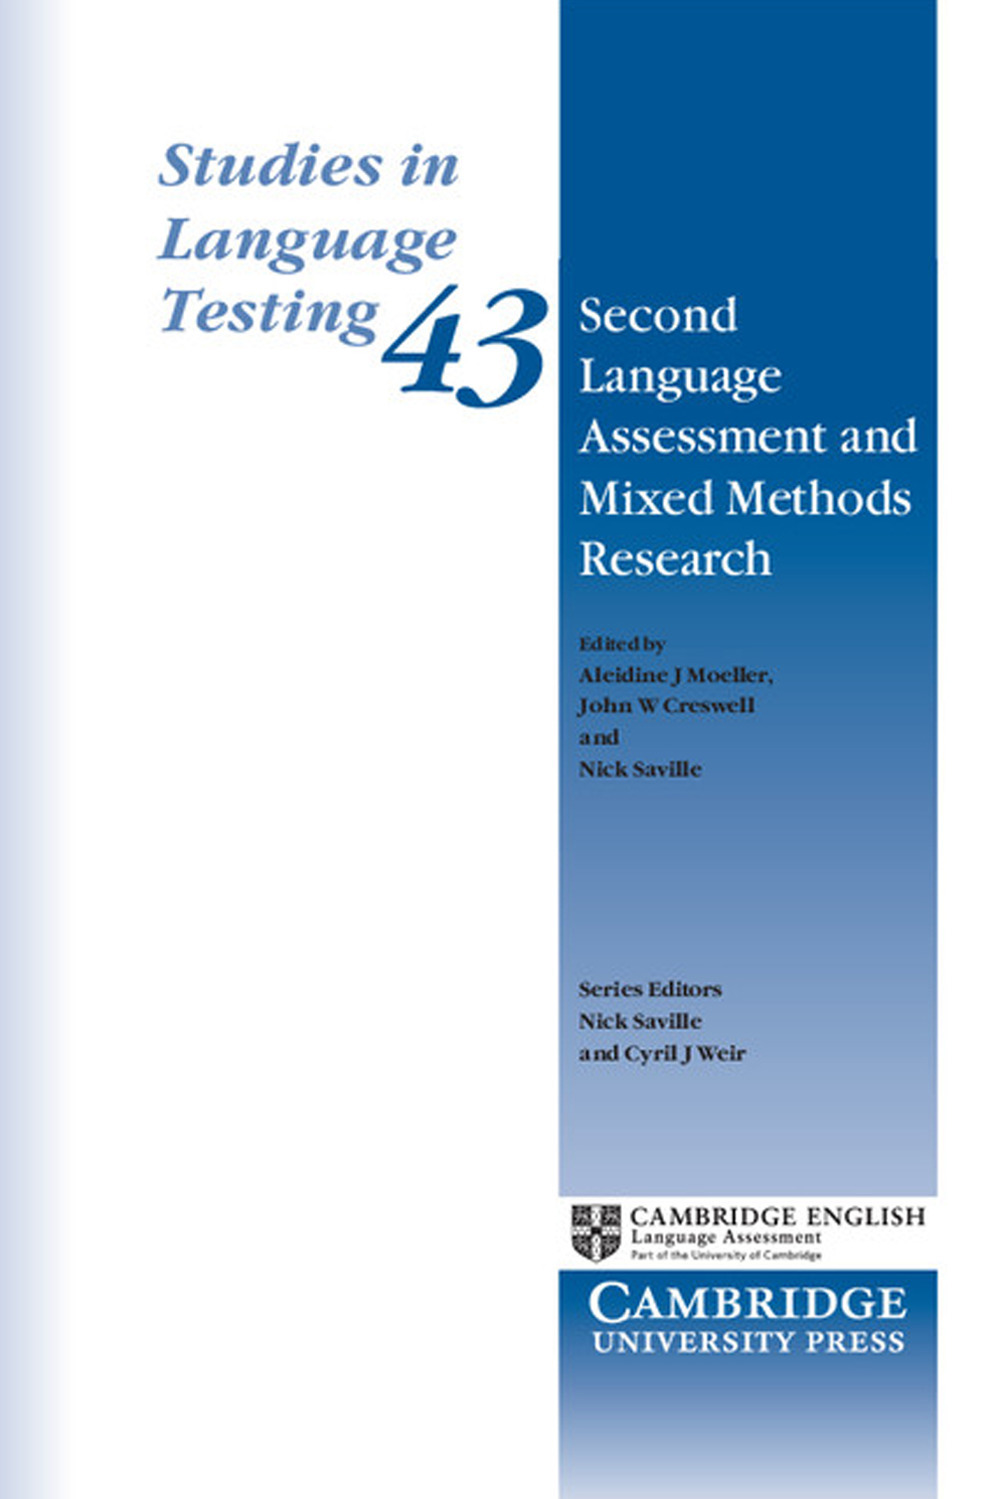 Studies in language testing. Vol. 46: Second language assessment and mixed methods research